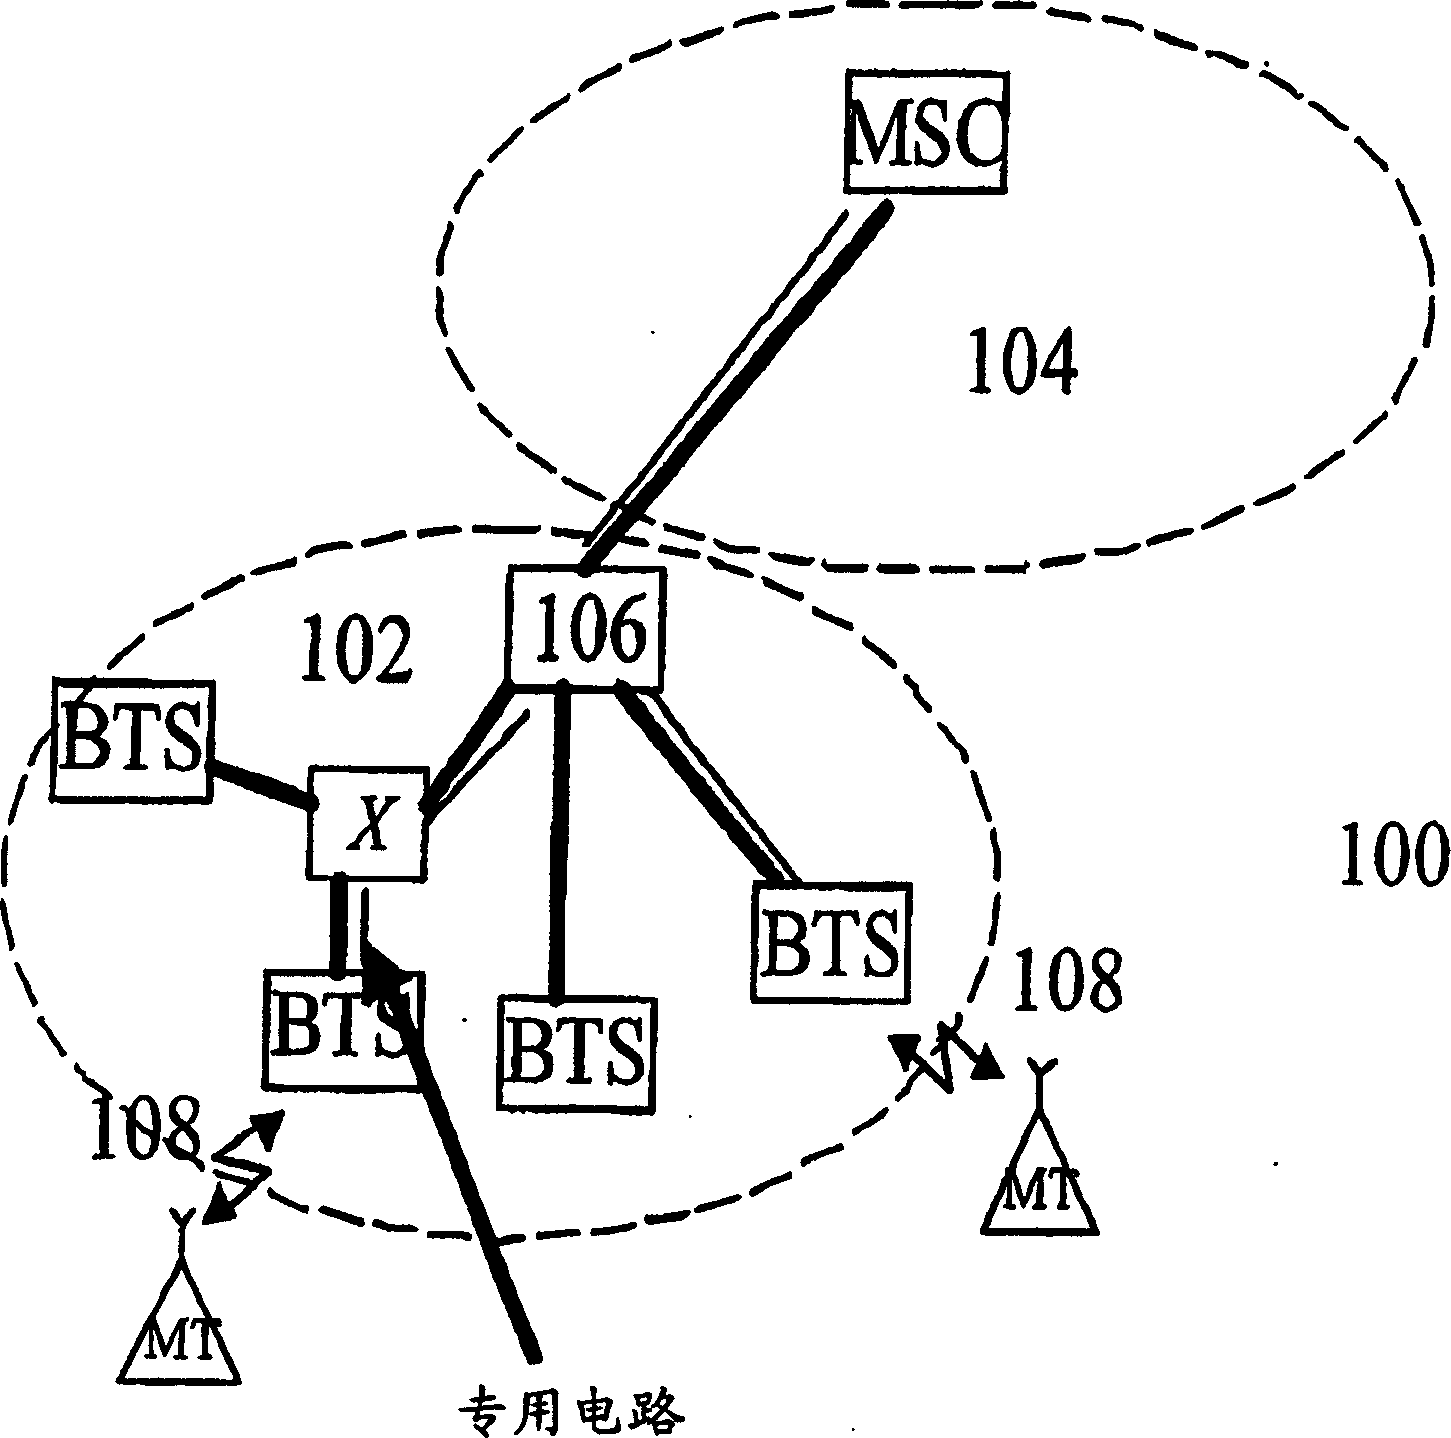 Network resource manager in a mobile telecommunication system